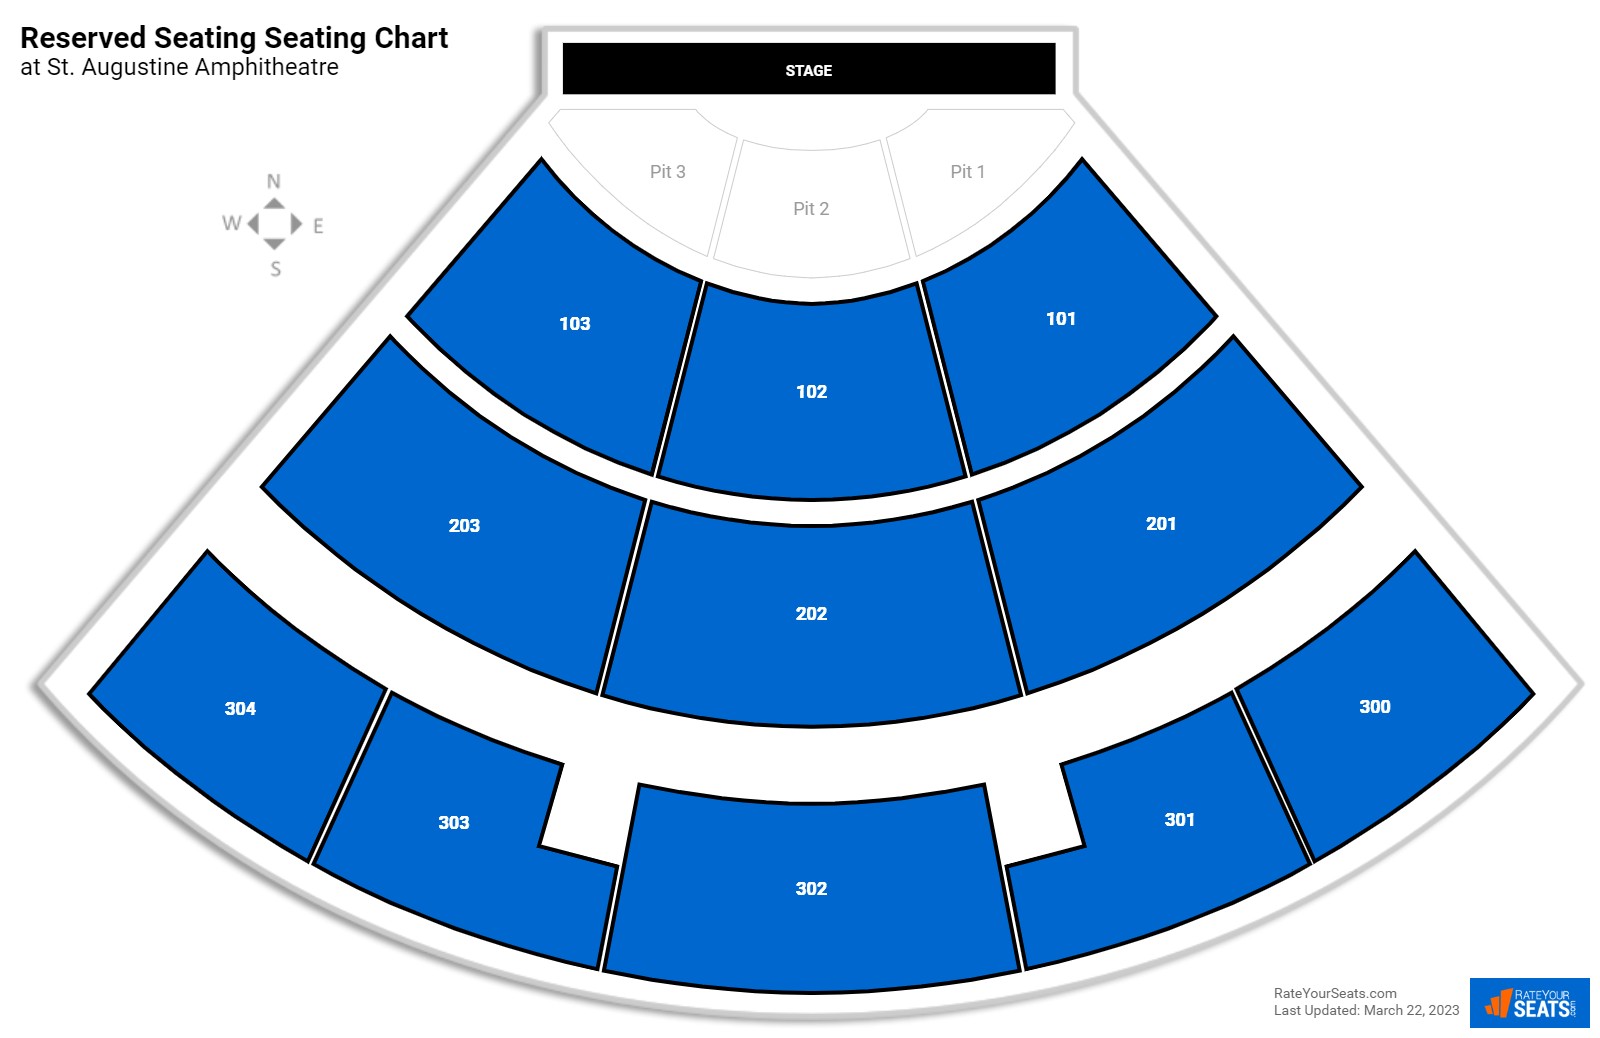 Concert Reserved Seating Seating Chart at St. Augustine Amphitheatre